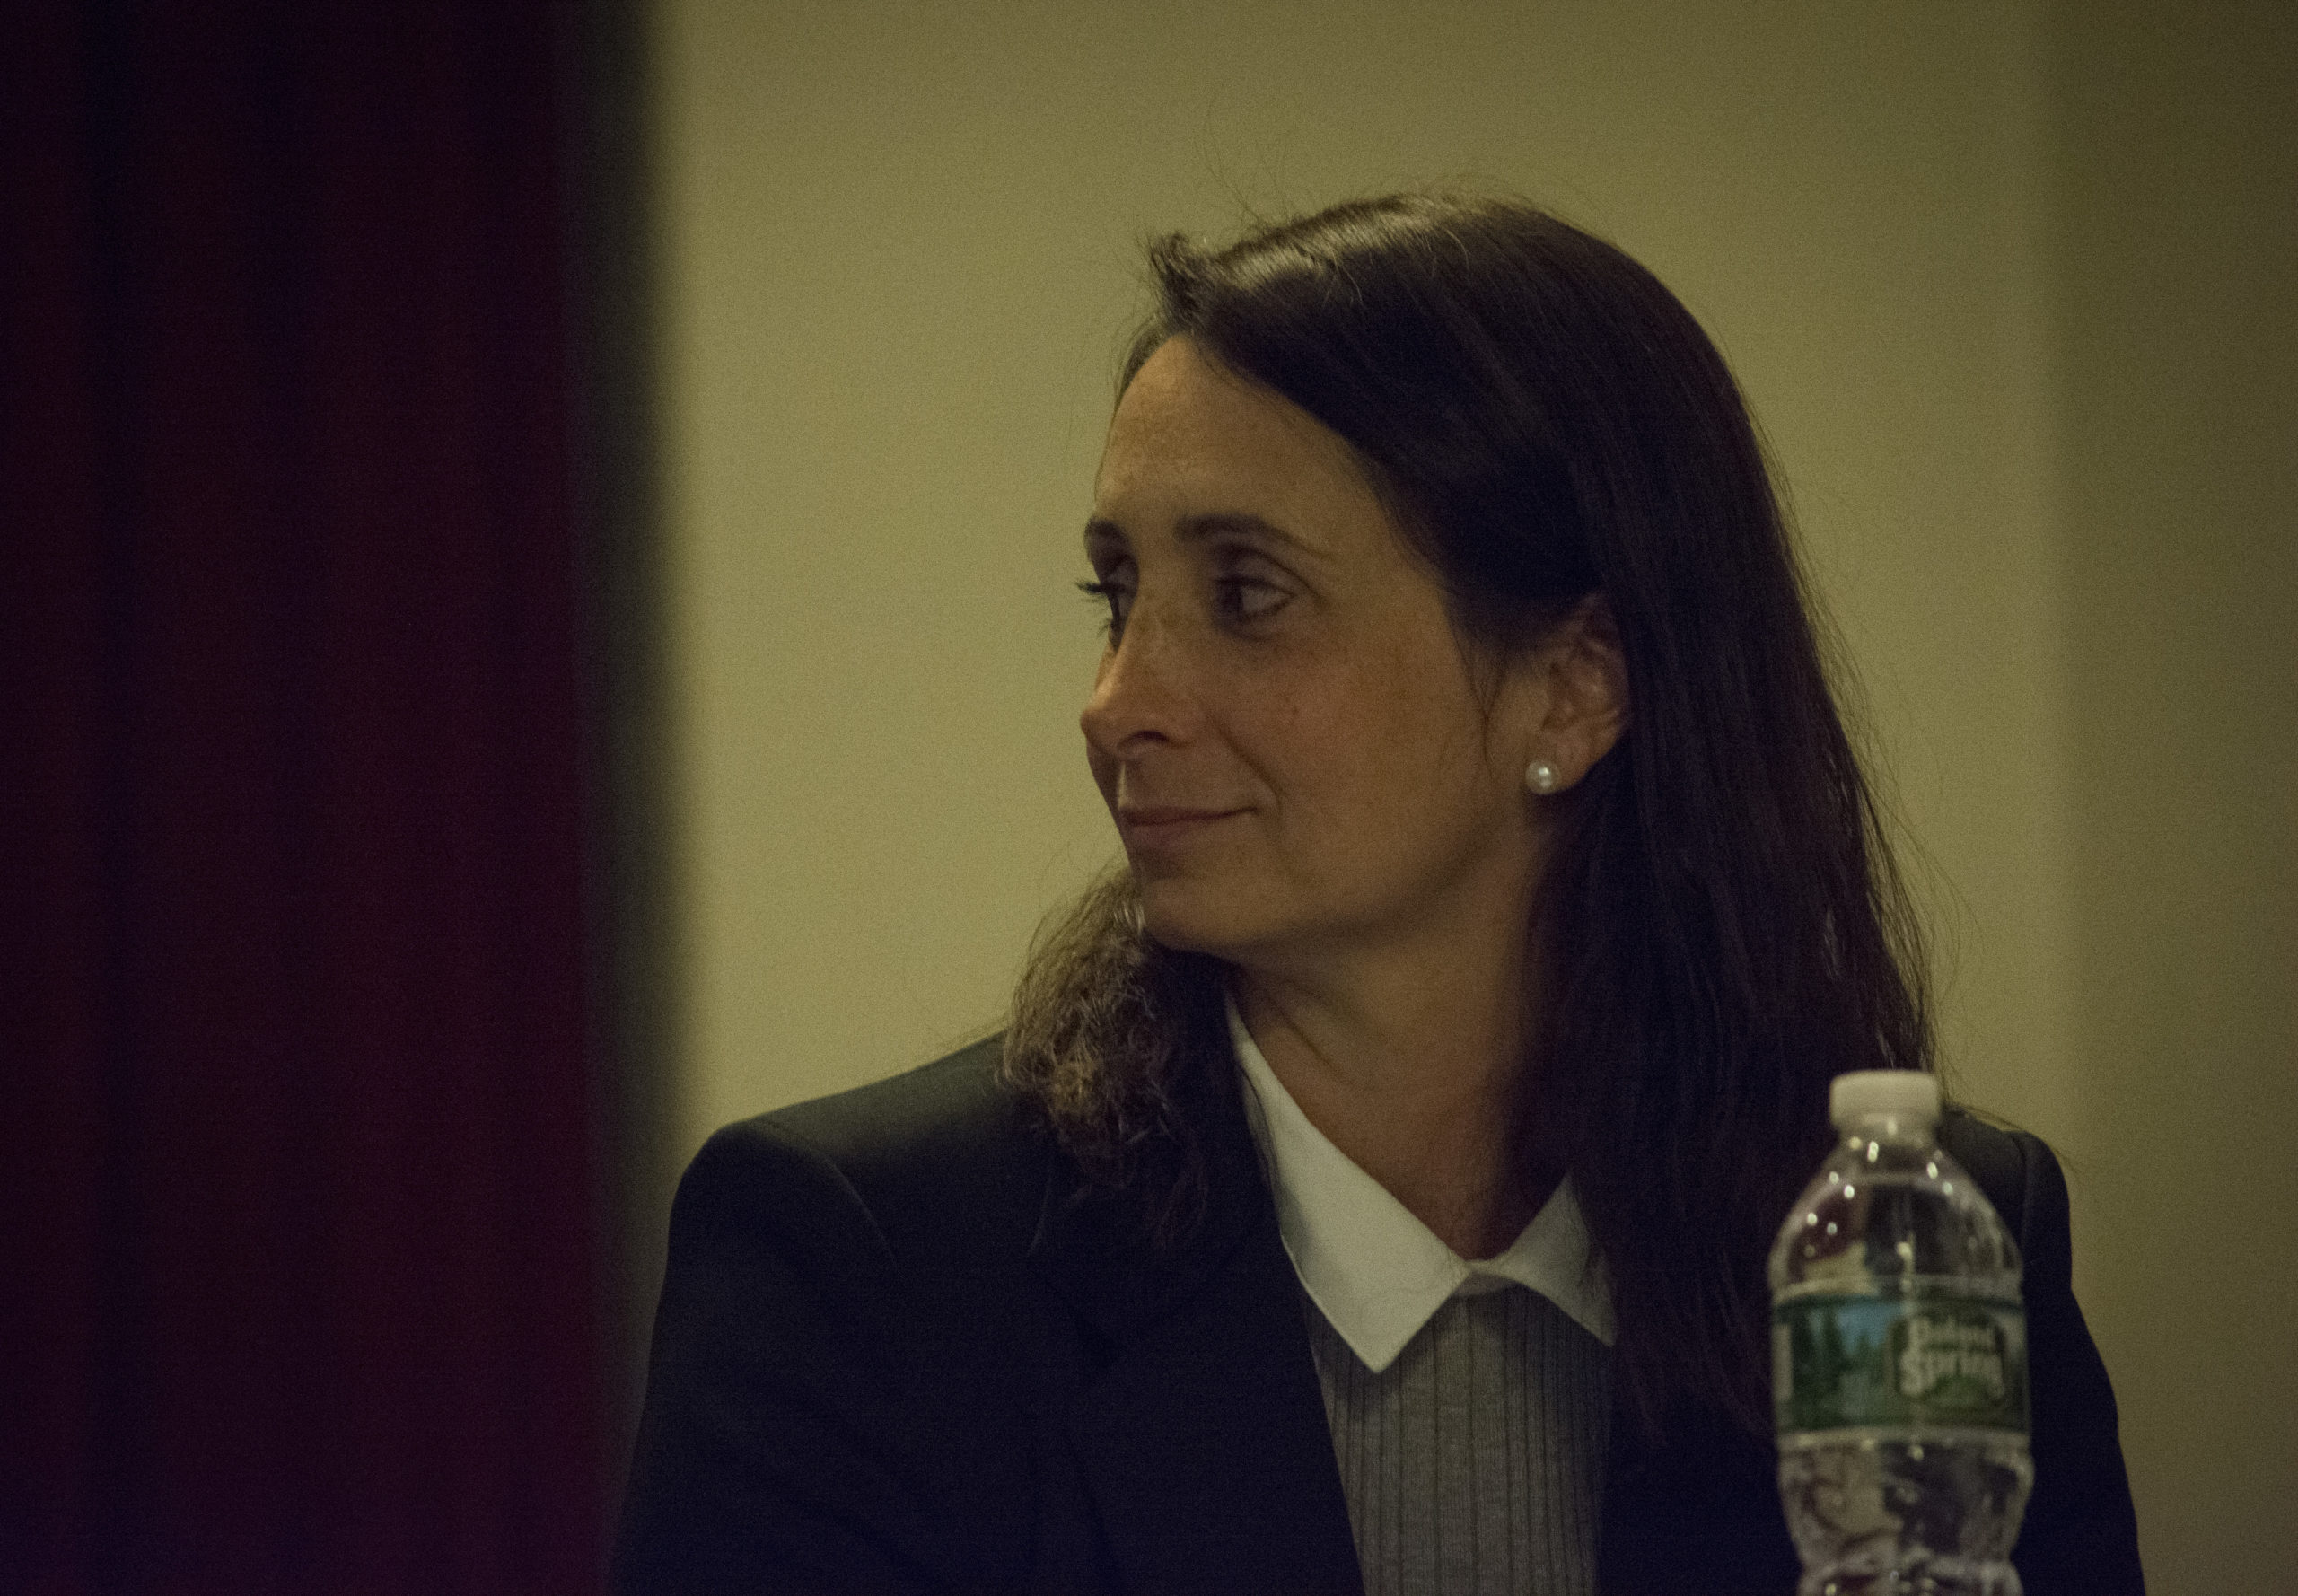 Tina Stellato, a candidate for Great Neck Park Commissioner, debated with incumbent Daniel Nachmanoff on Thursday night.